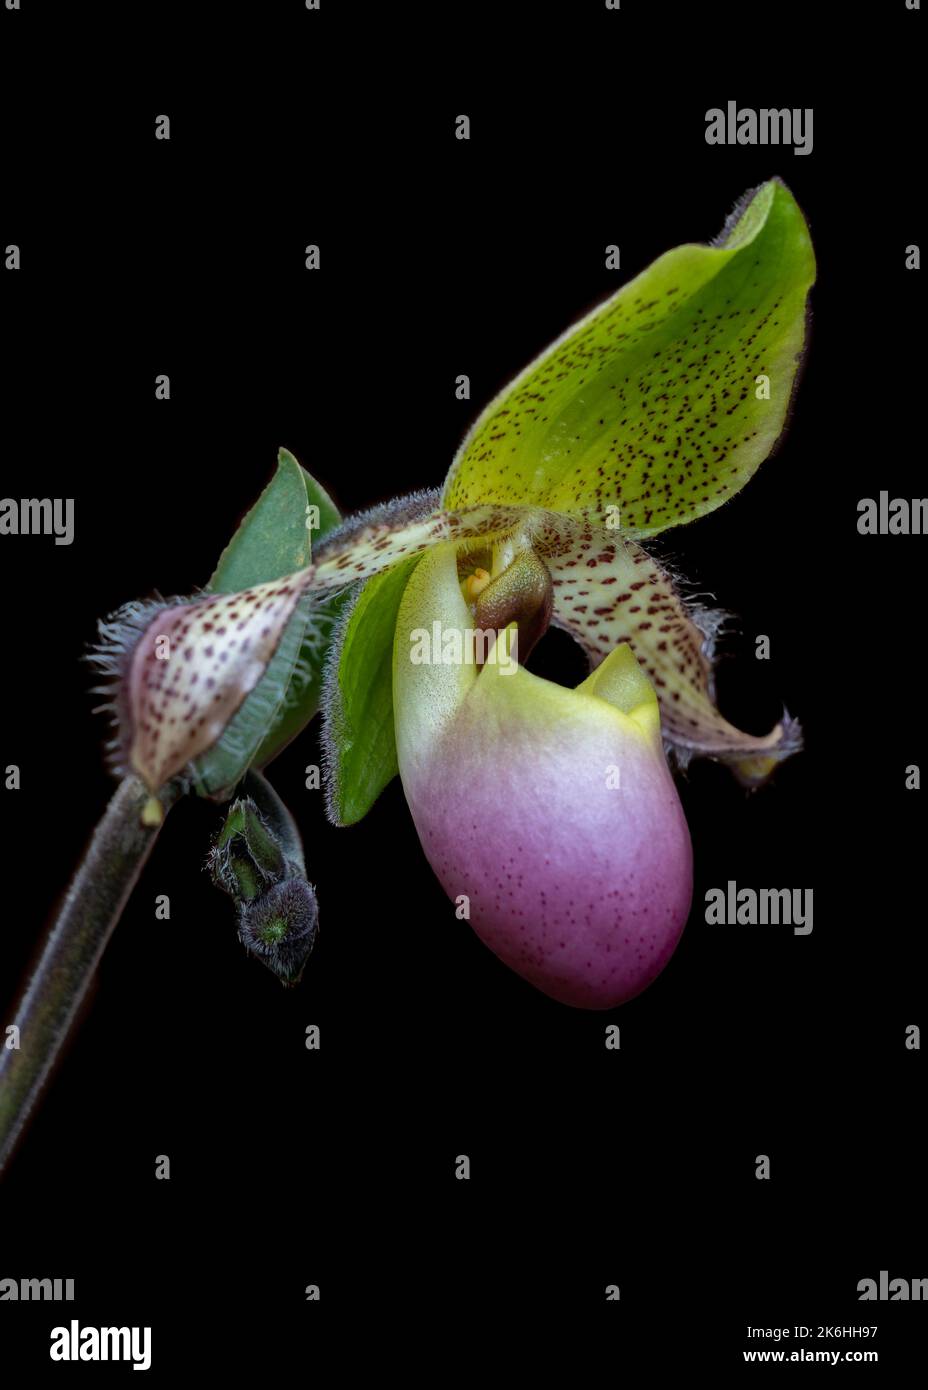 Closeup side view of bright yellow green and purple pink flower of lady slipper orchid species paphiopedilum moquetteanum isolated on black background Stock Photo